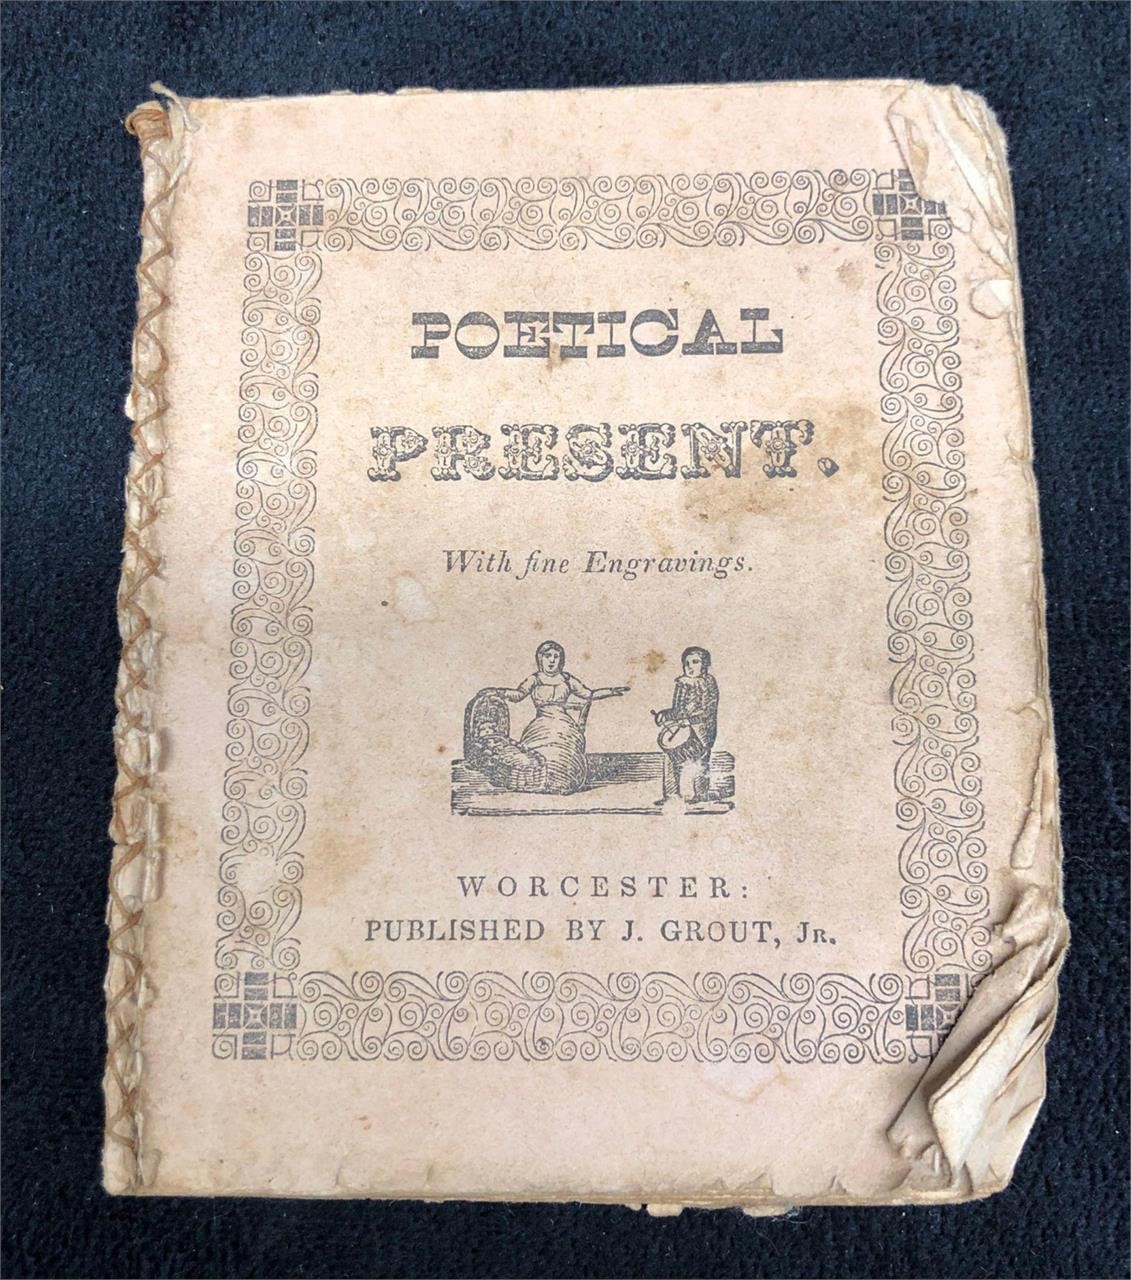 "The Poetical Present" - Antique Chapbook